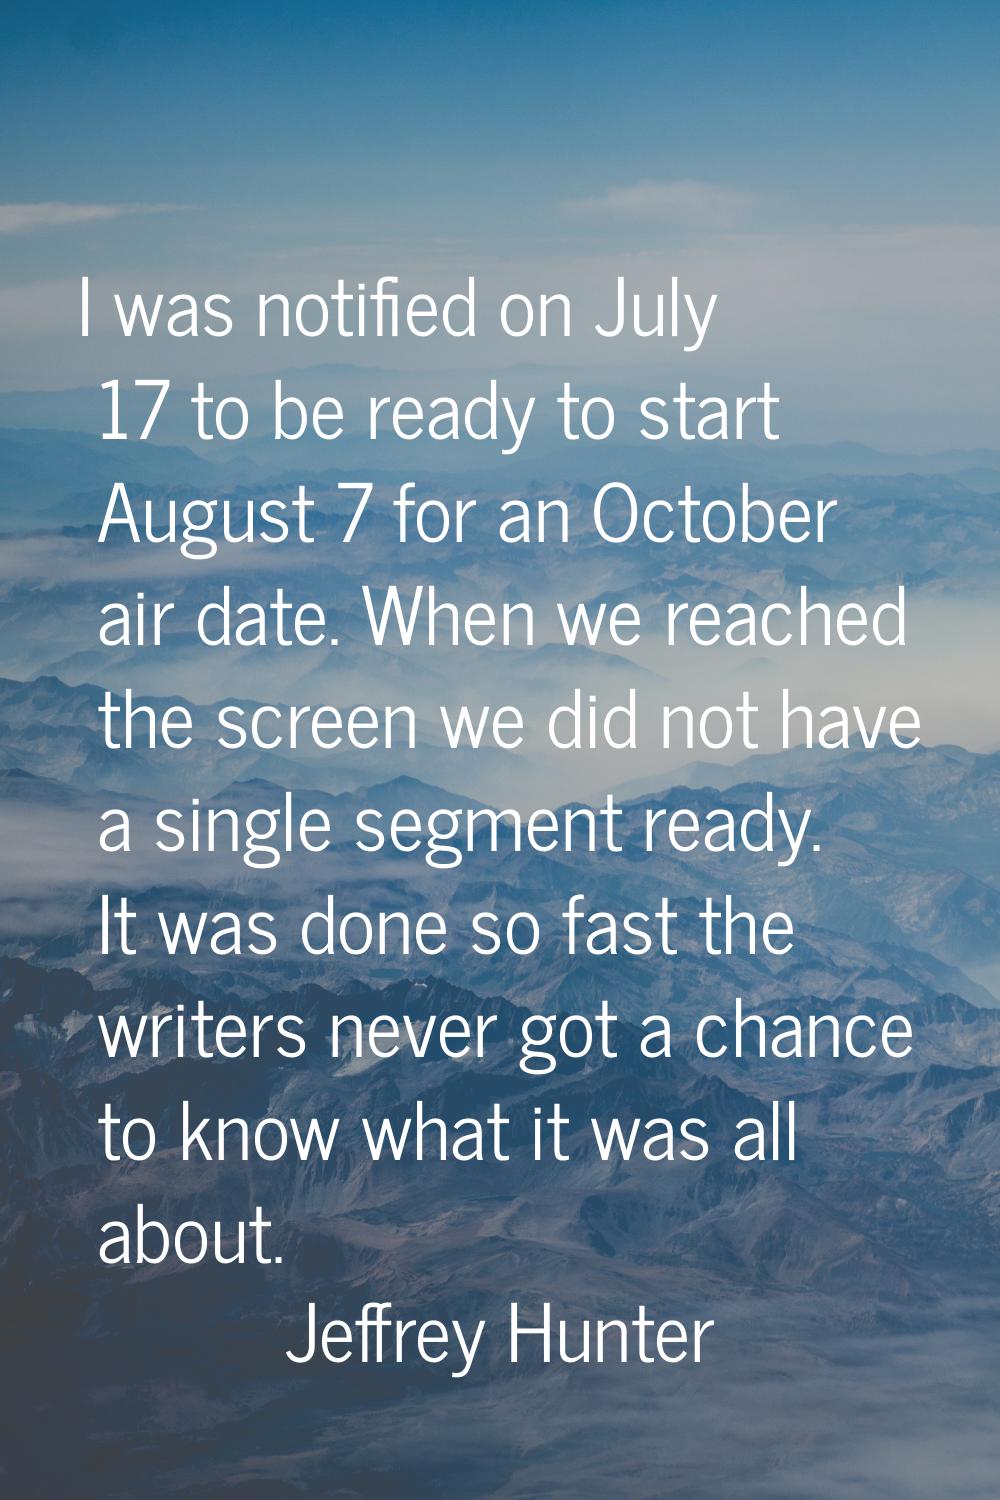 I was notified on July 17 to be ready to start August 7 for an October air date. When we reached th